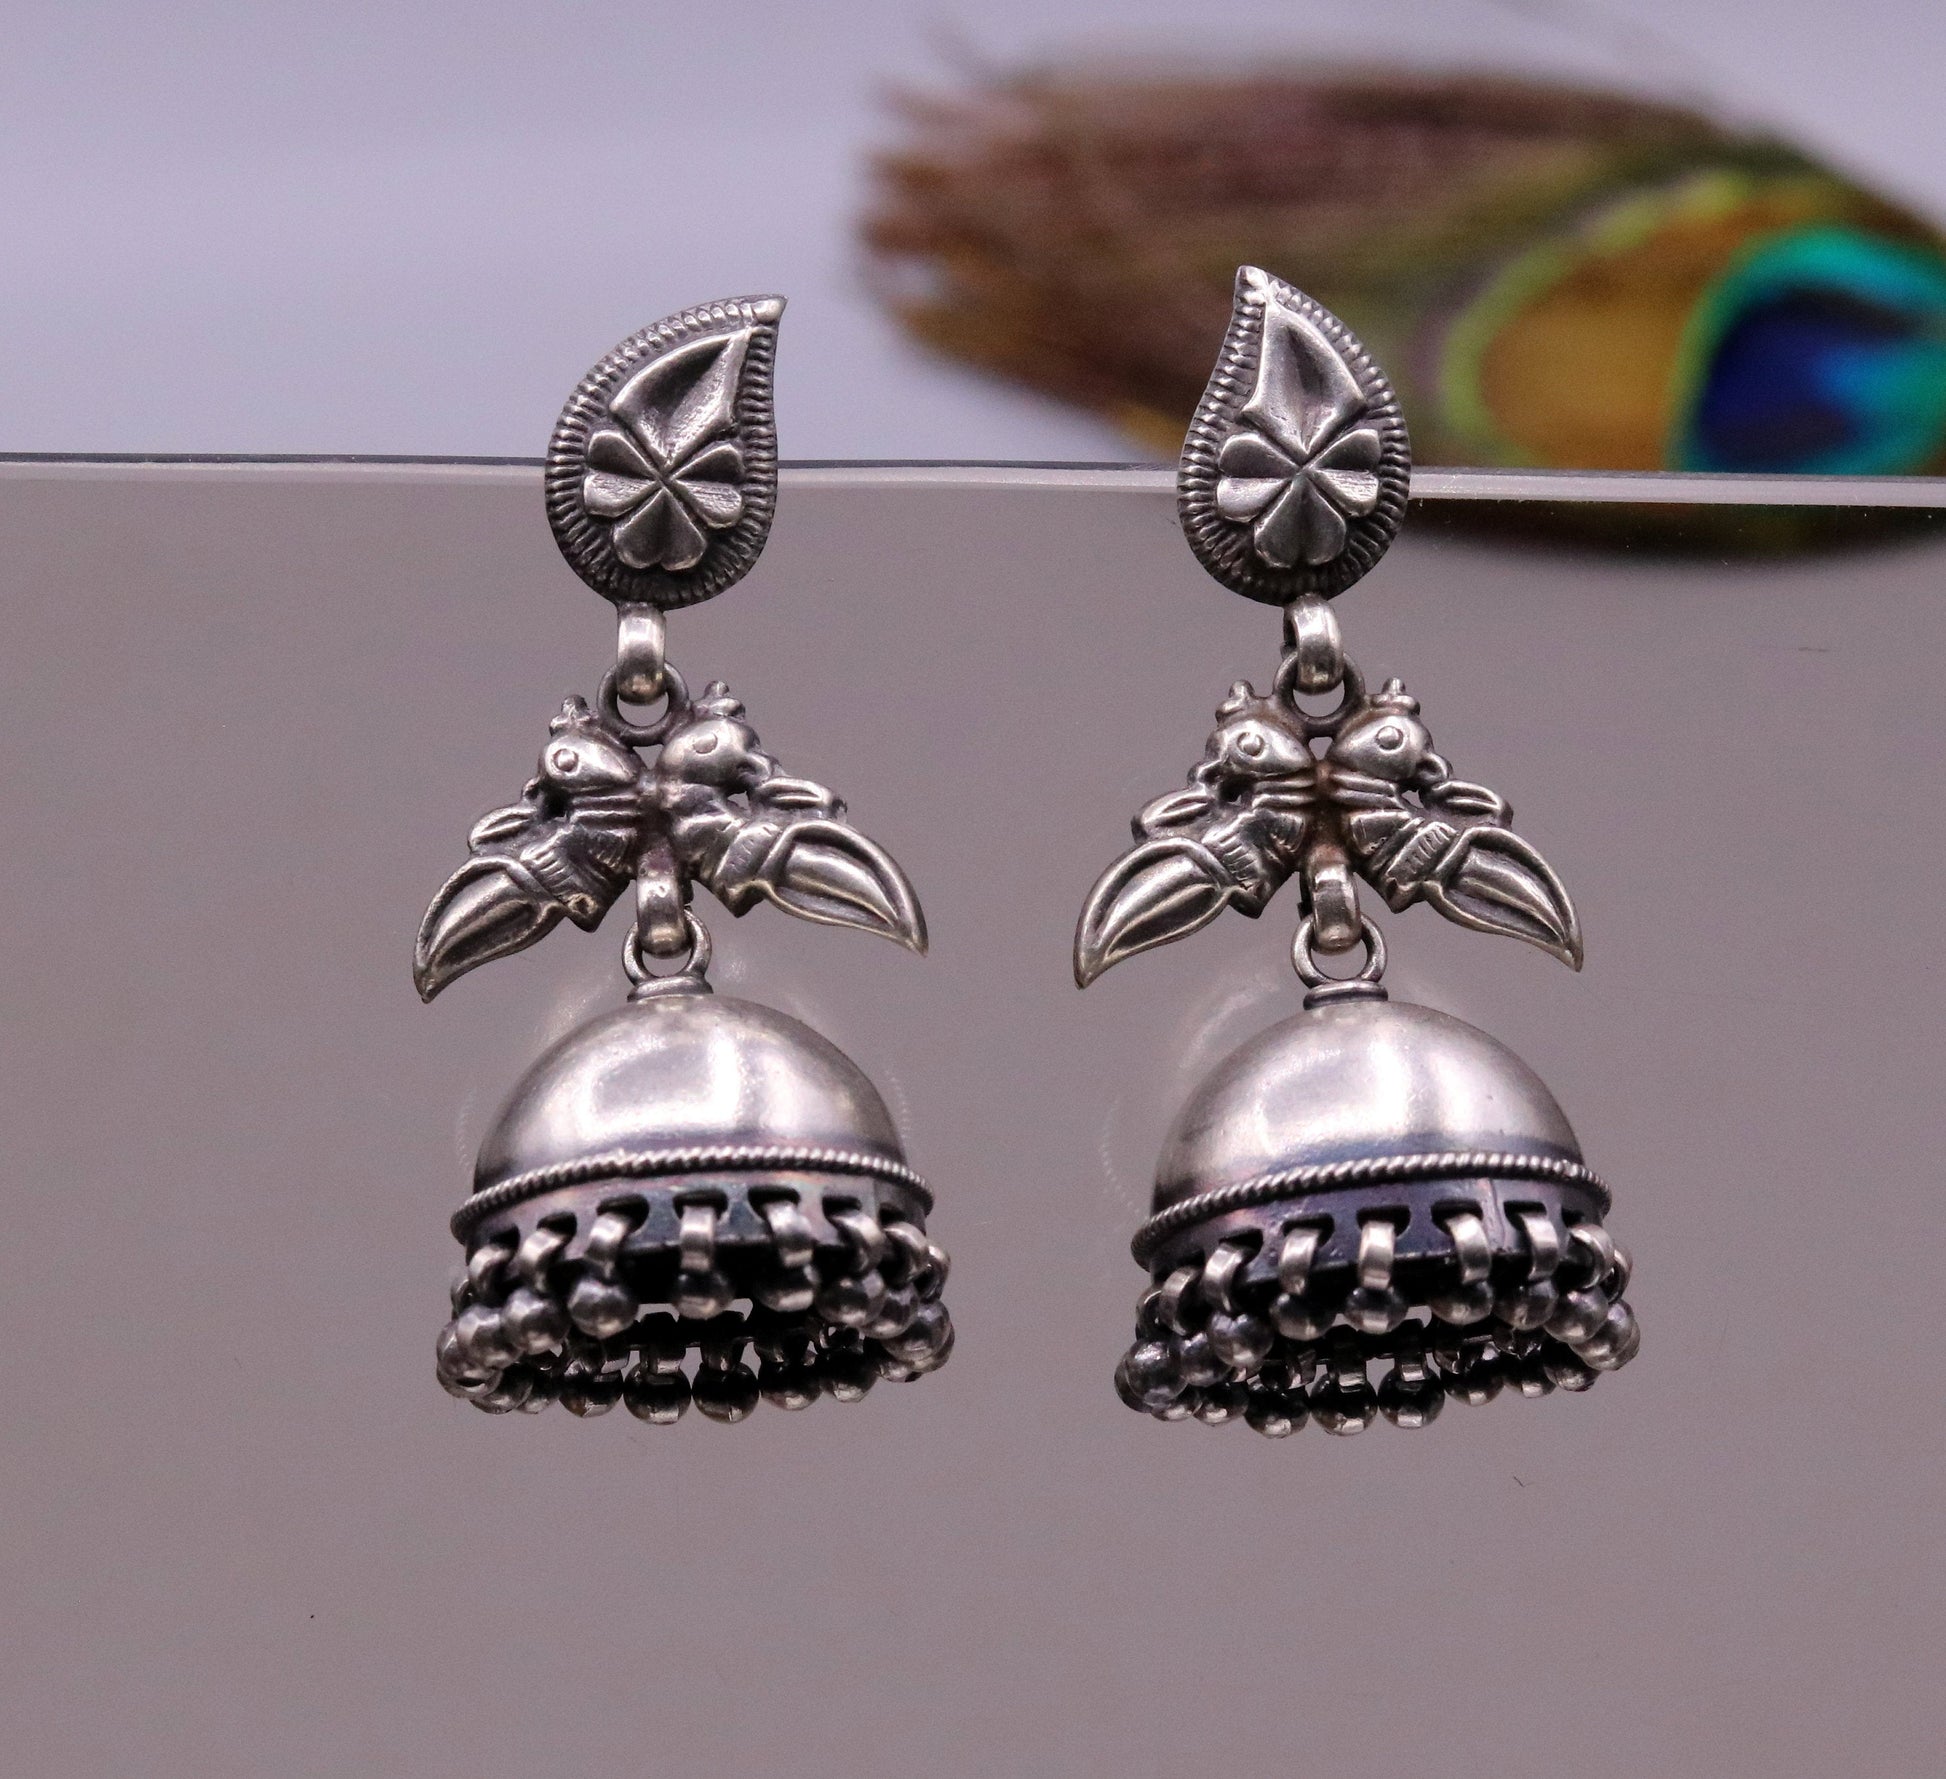 Handcrafted vintage peacock design 925 sterling silver gorgeous stud earring jhumki, drop dangle chandelier style light weight earring s794 - TRIBAL ORNAMENTS